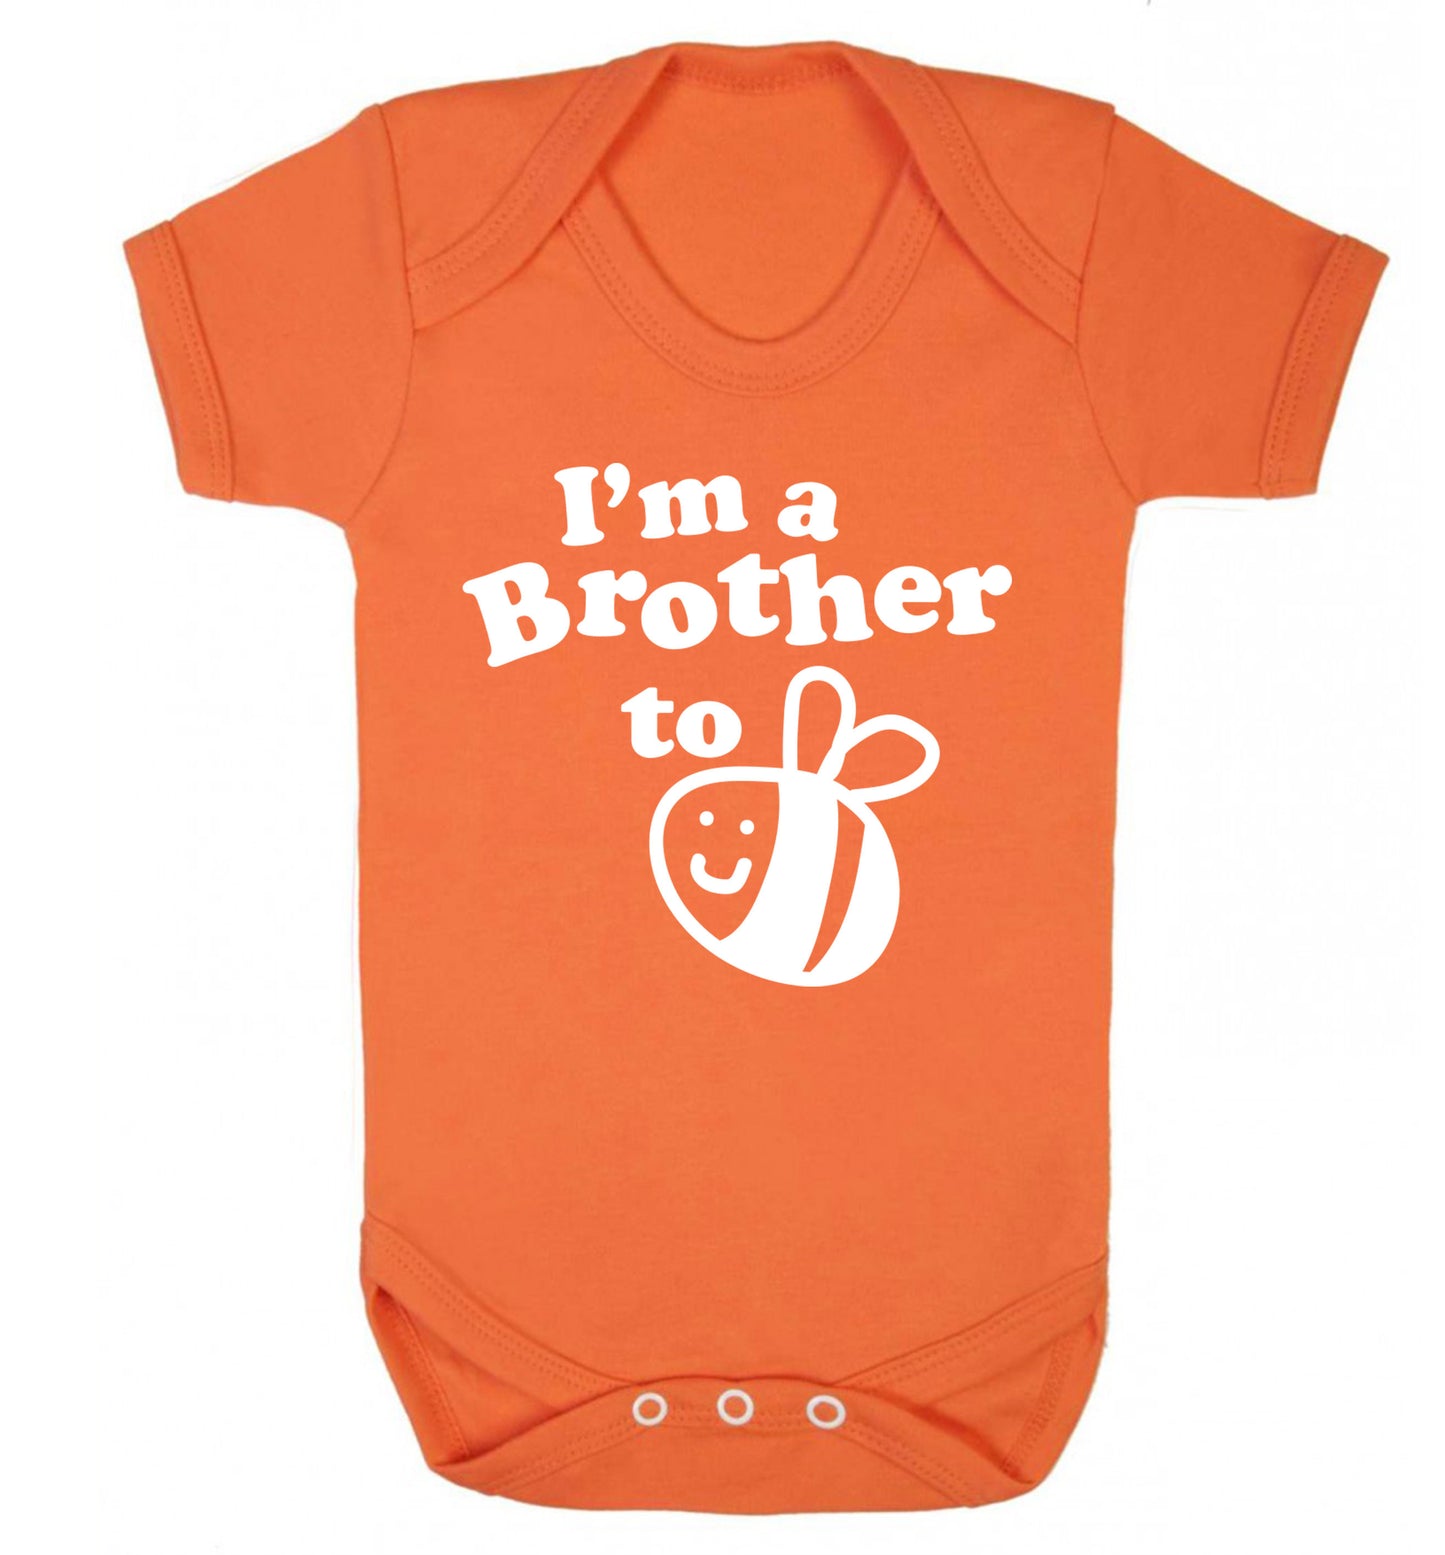 I'm a brother to be Baby Vest orange 18-24 months